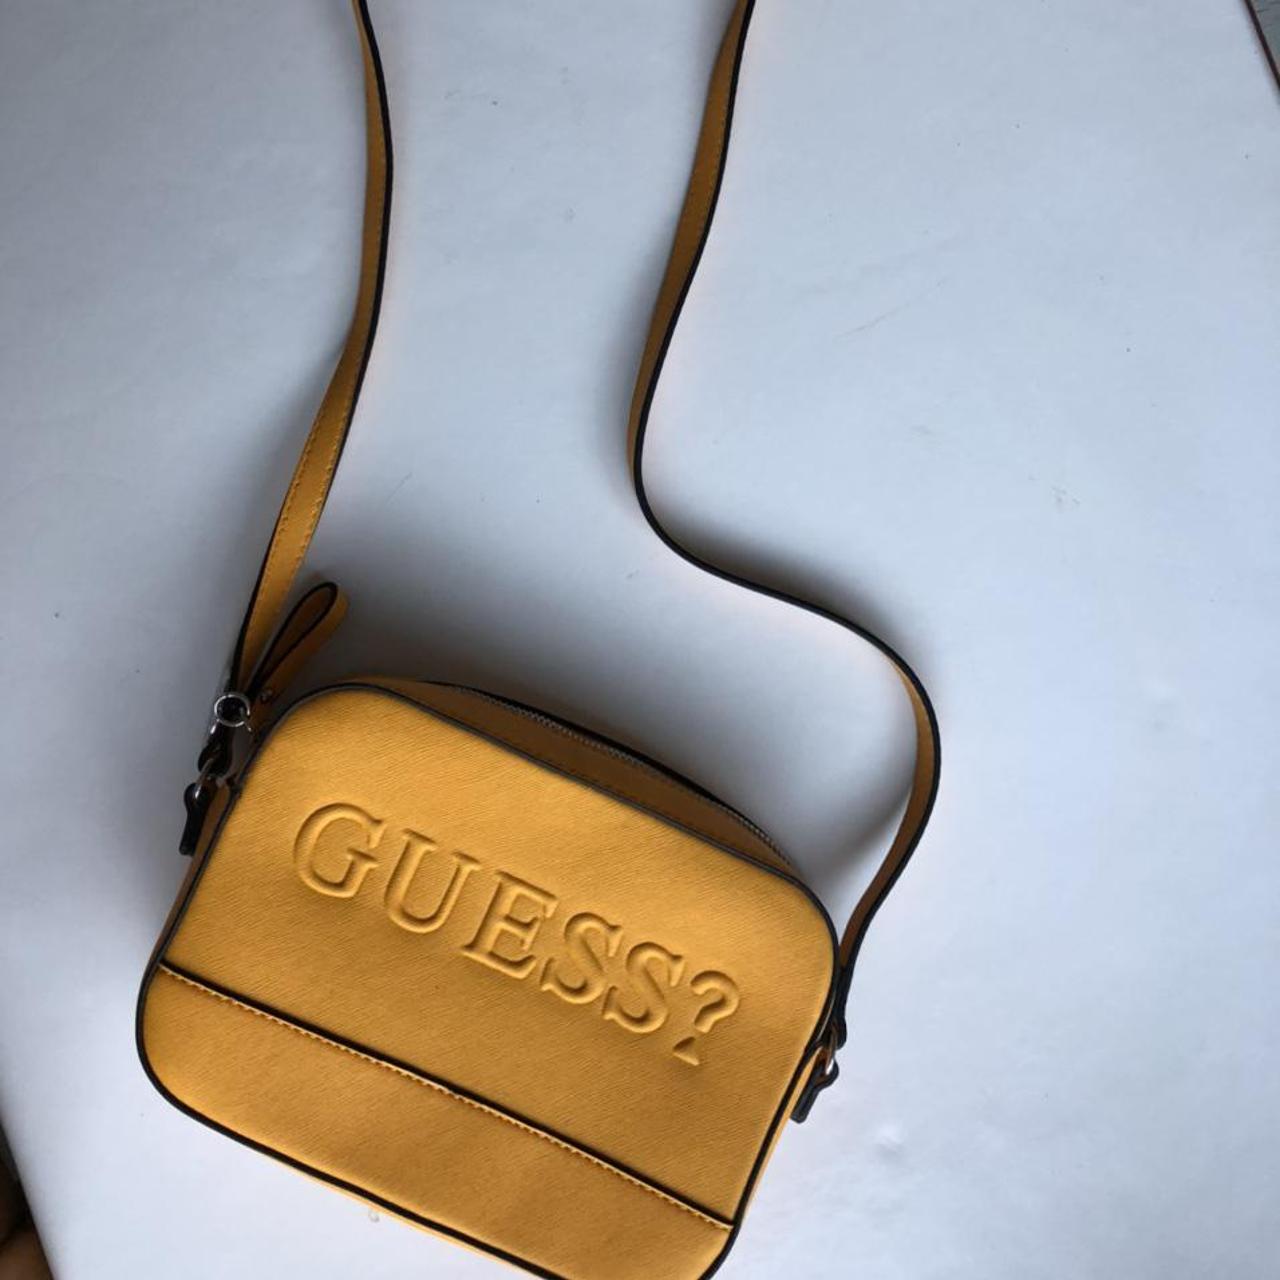 Product Image 1 - GUESS SIDE BAG IN YELLOW

Worn